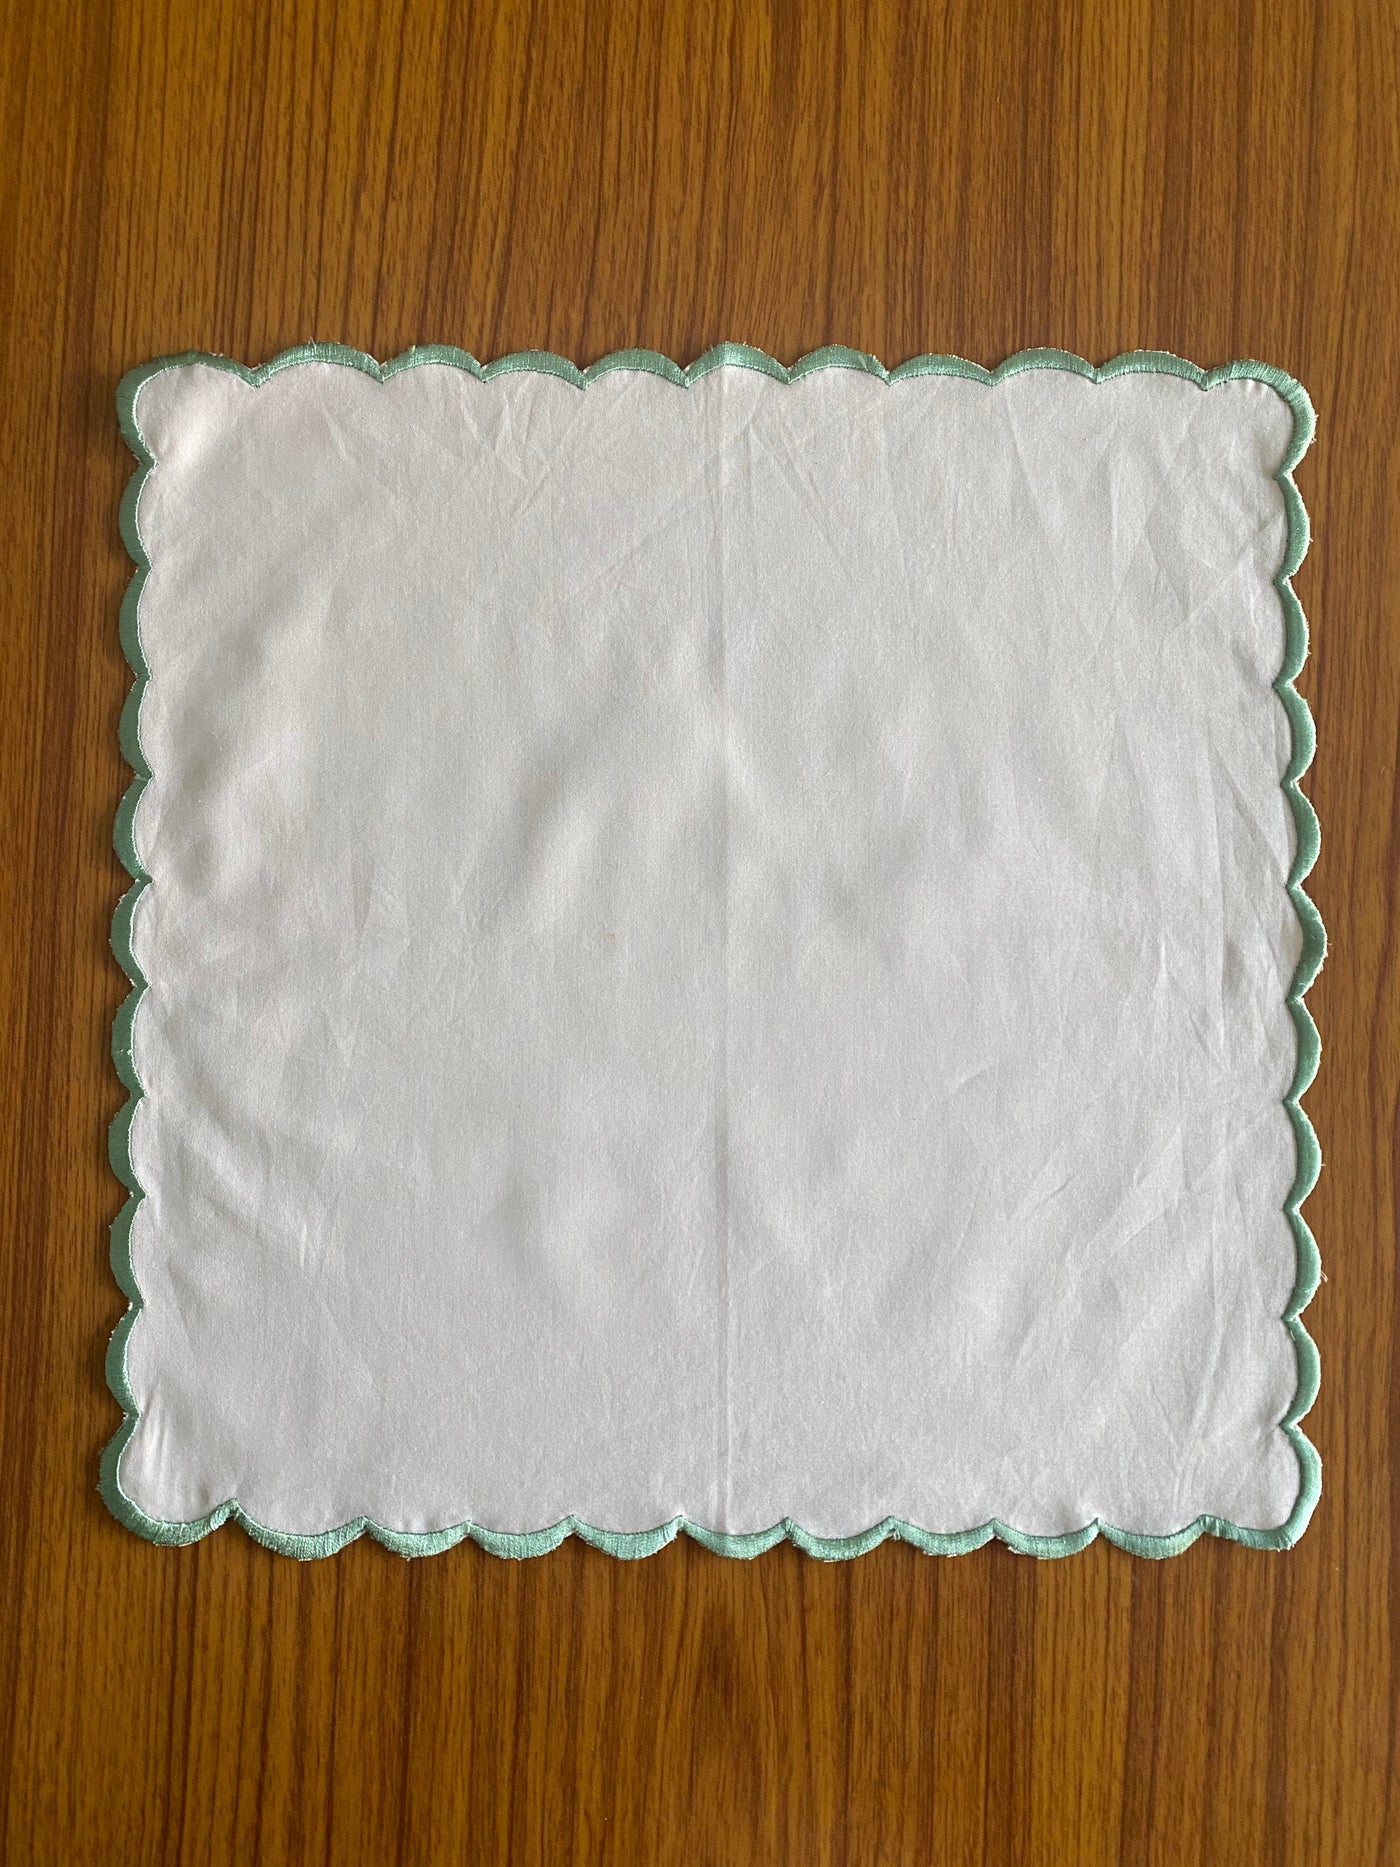 White Indian Soft Cotton Cloth Embroidered Scallops Napkins, Housewarming Farmhouse Home Event Wedding Gifts, 9X9"- Cocktail 18x18"- Dinner